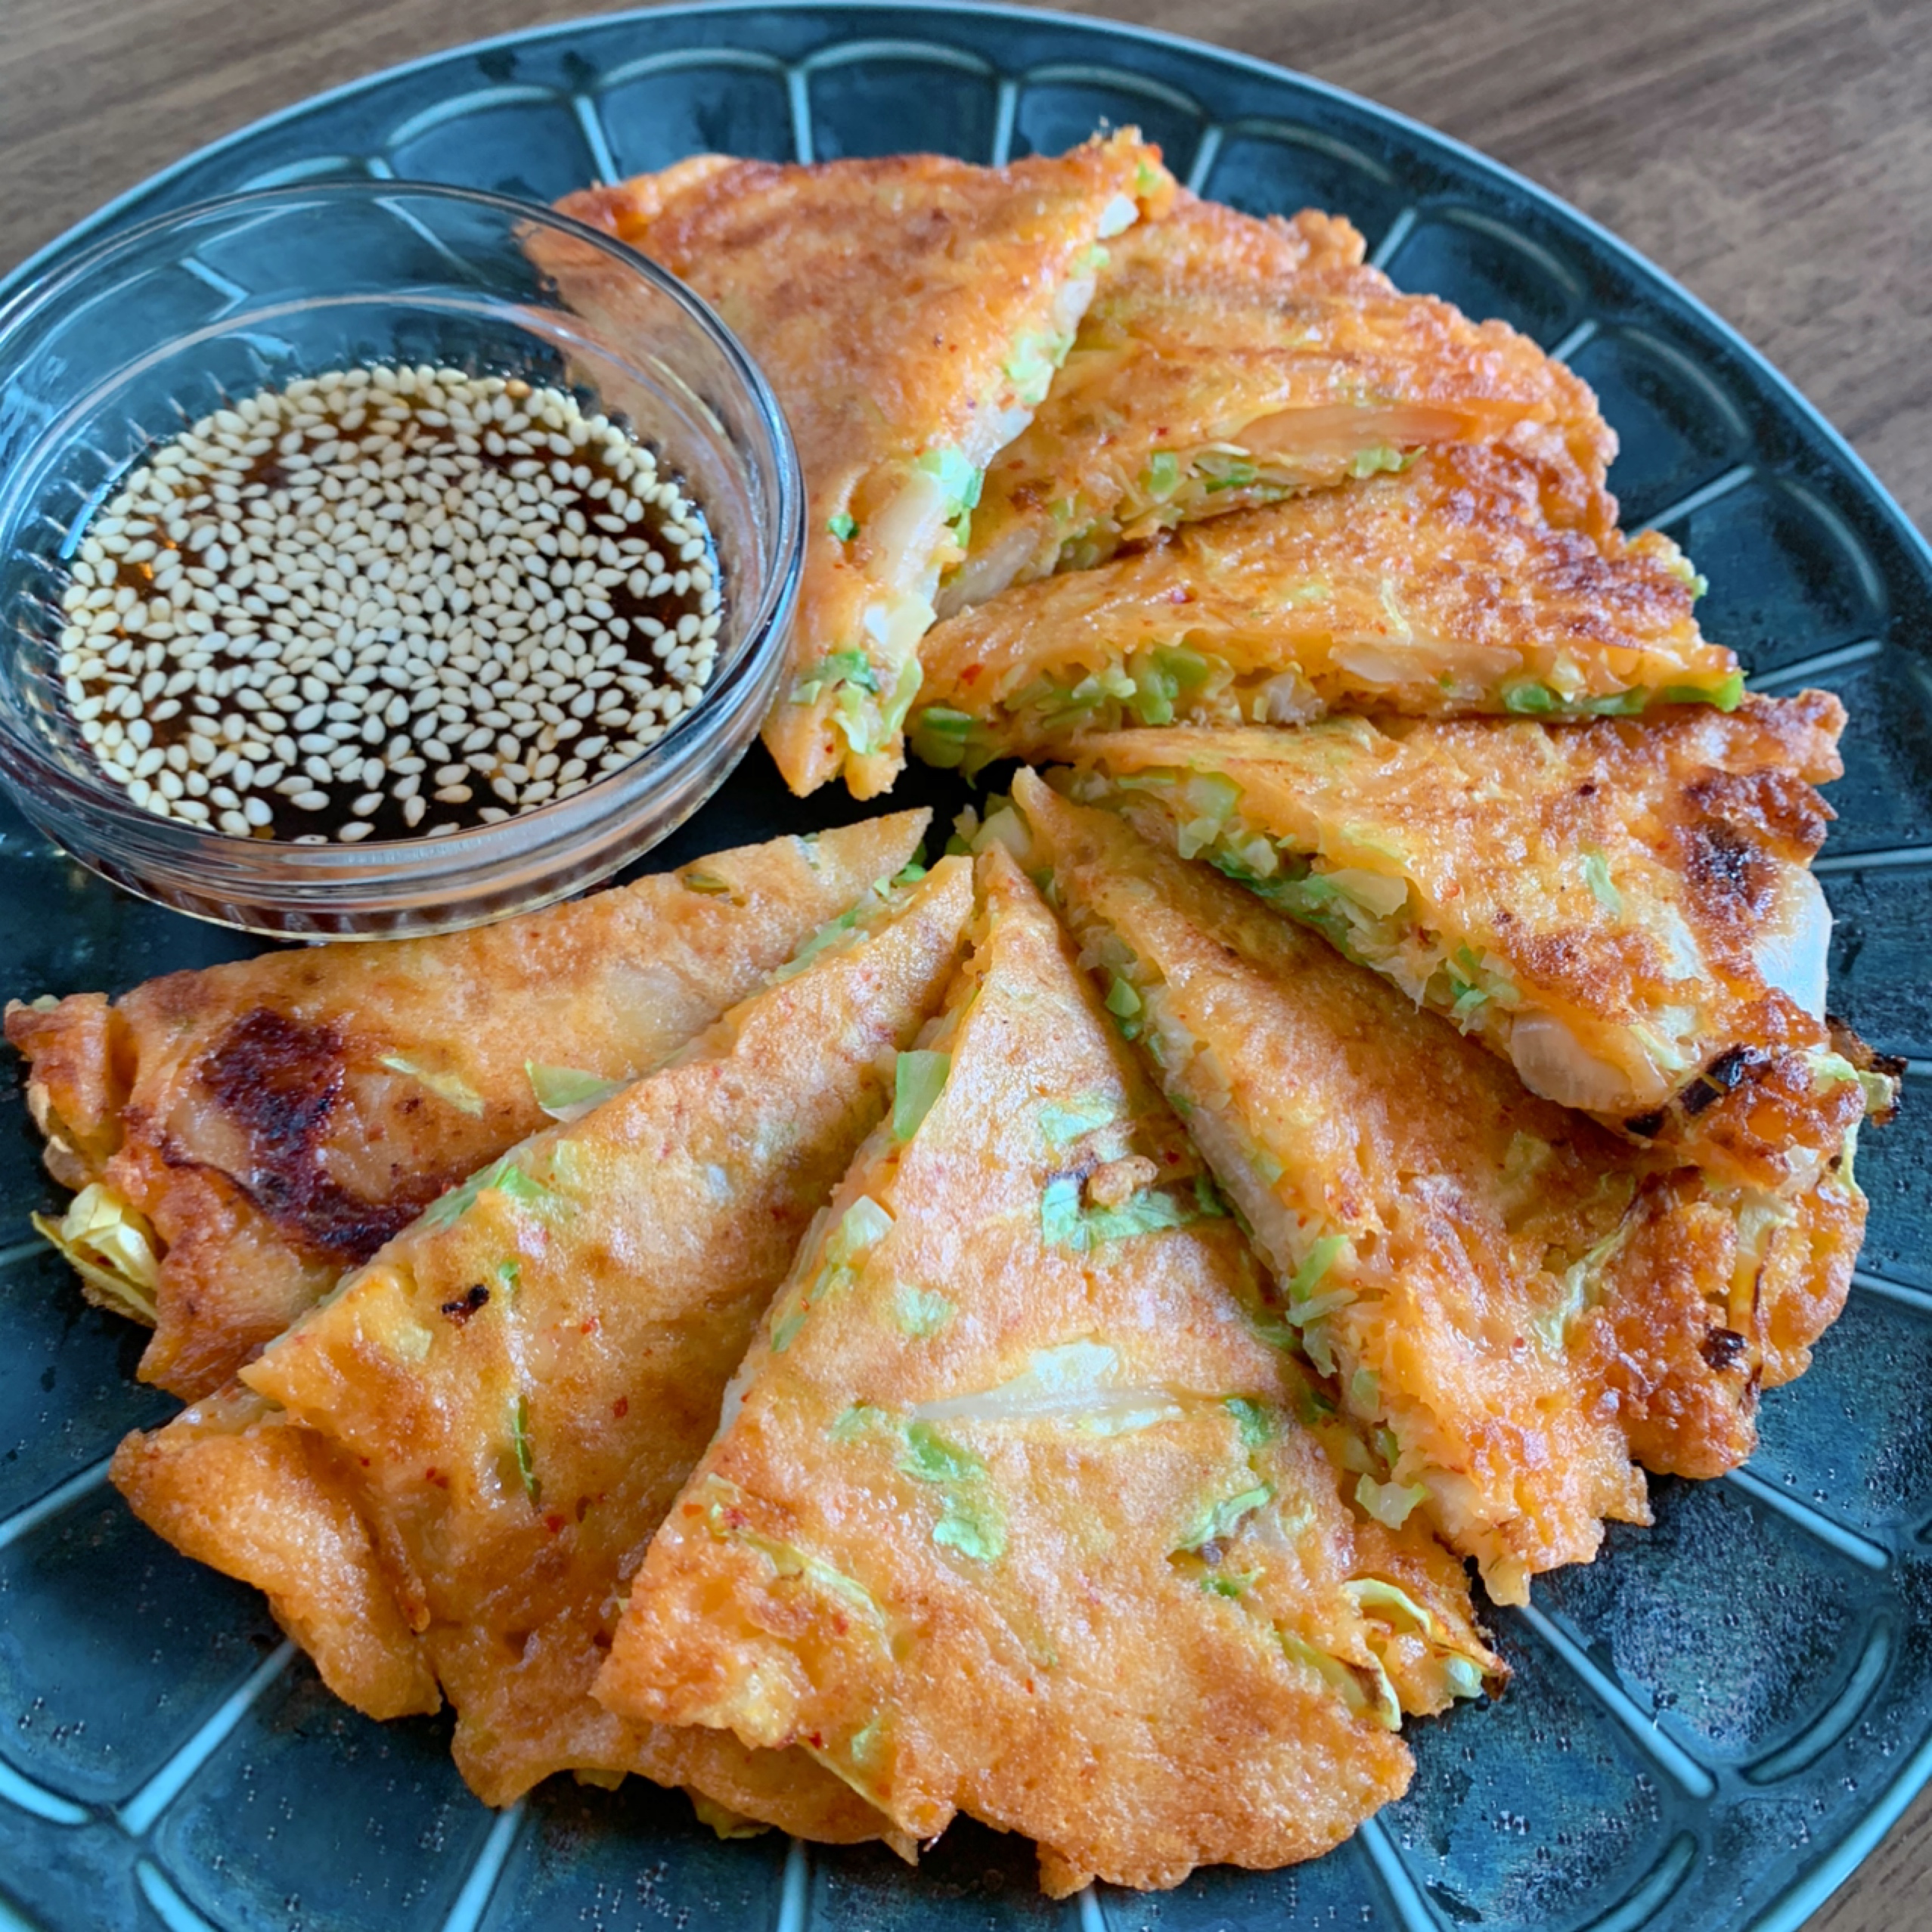 This is a Korean pancake recipe with cabbage and kimchi.